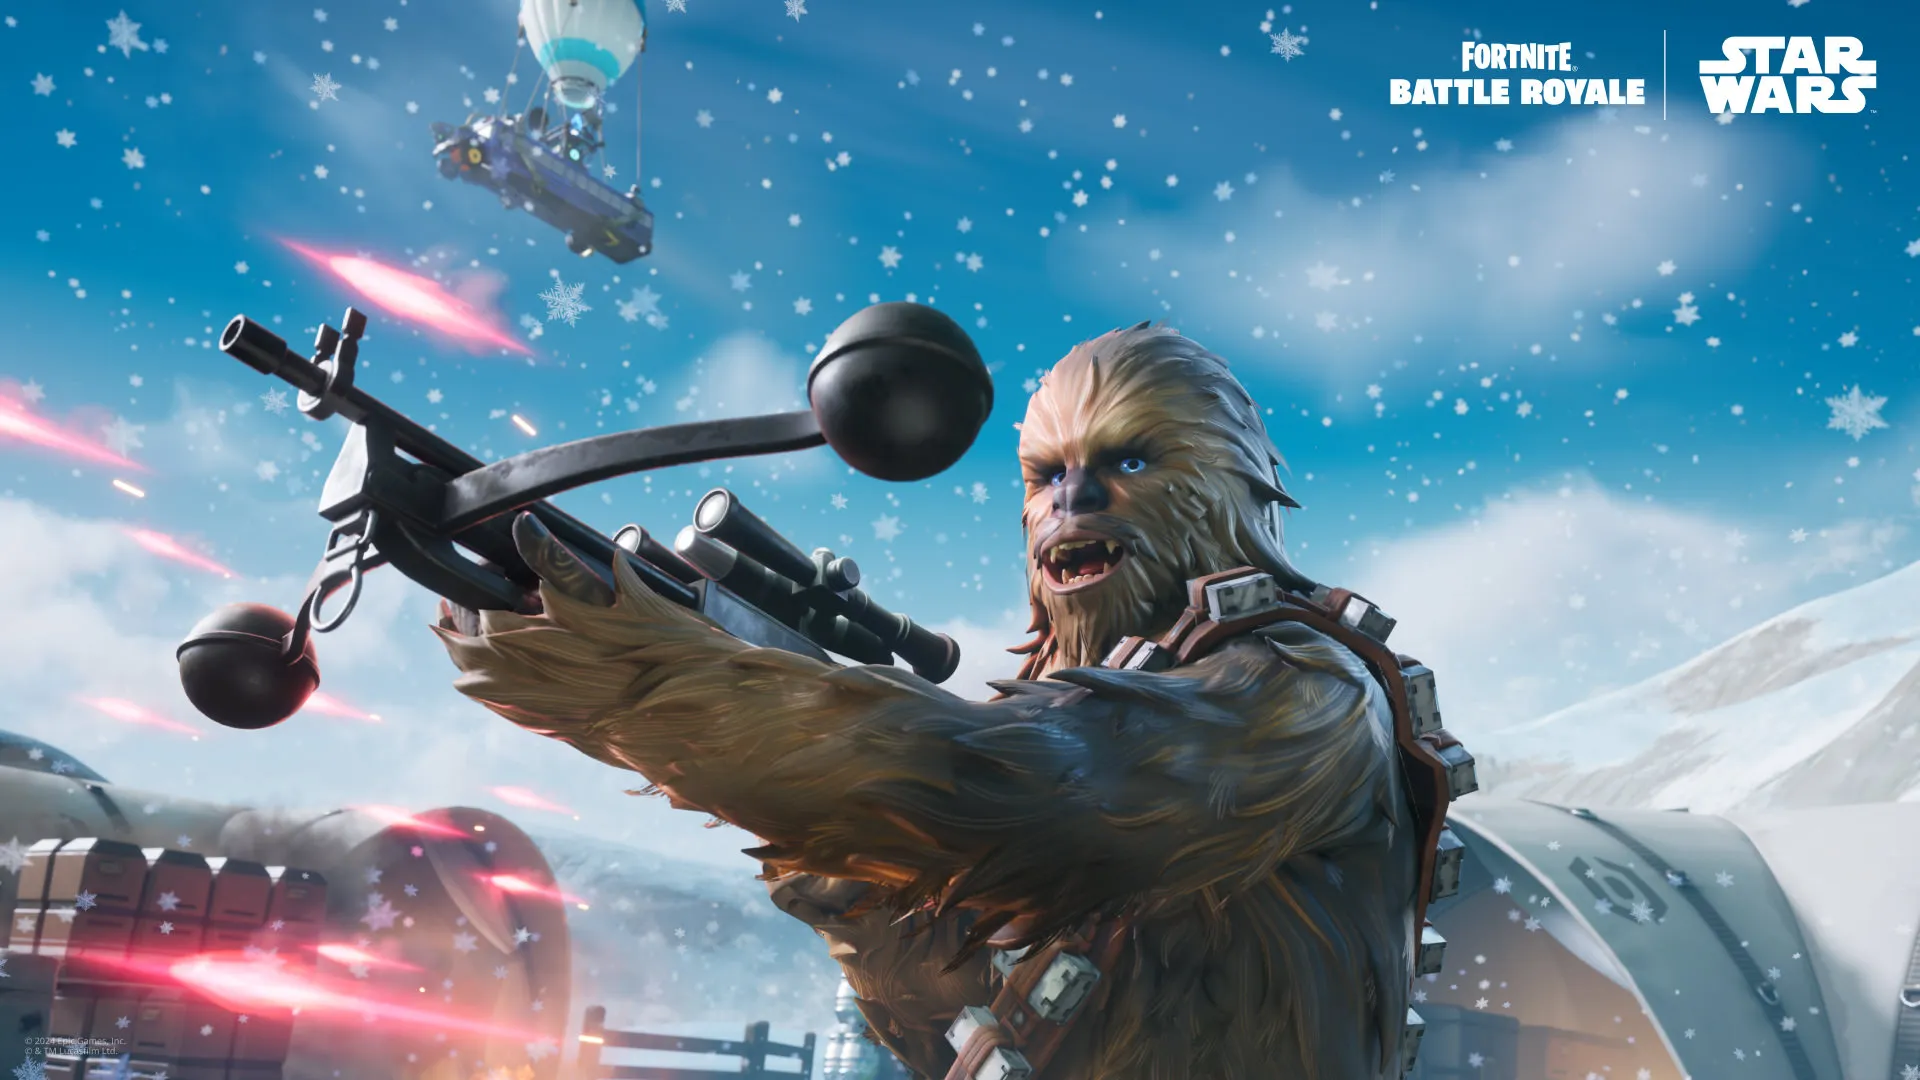 Star Wars Fortnite BR teaser confirms Chewbacca and his signature Bowcaster